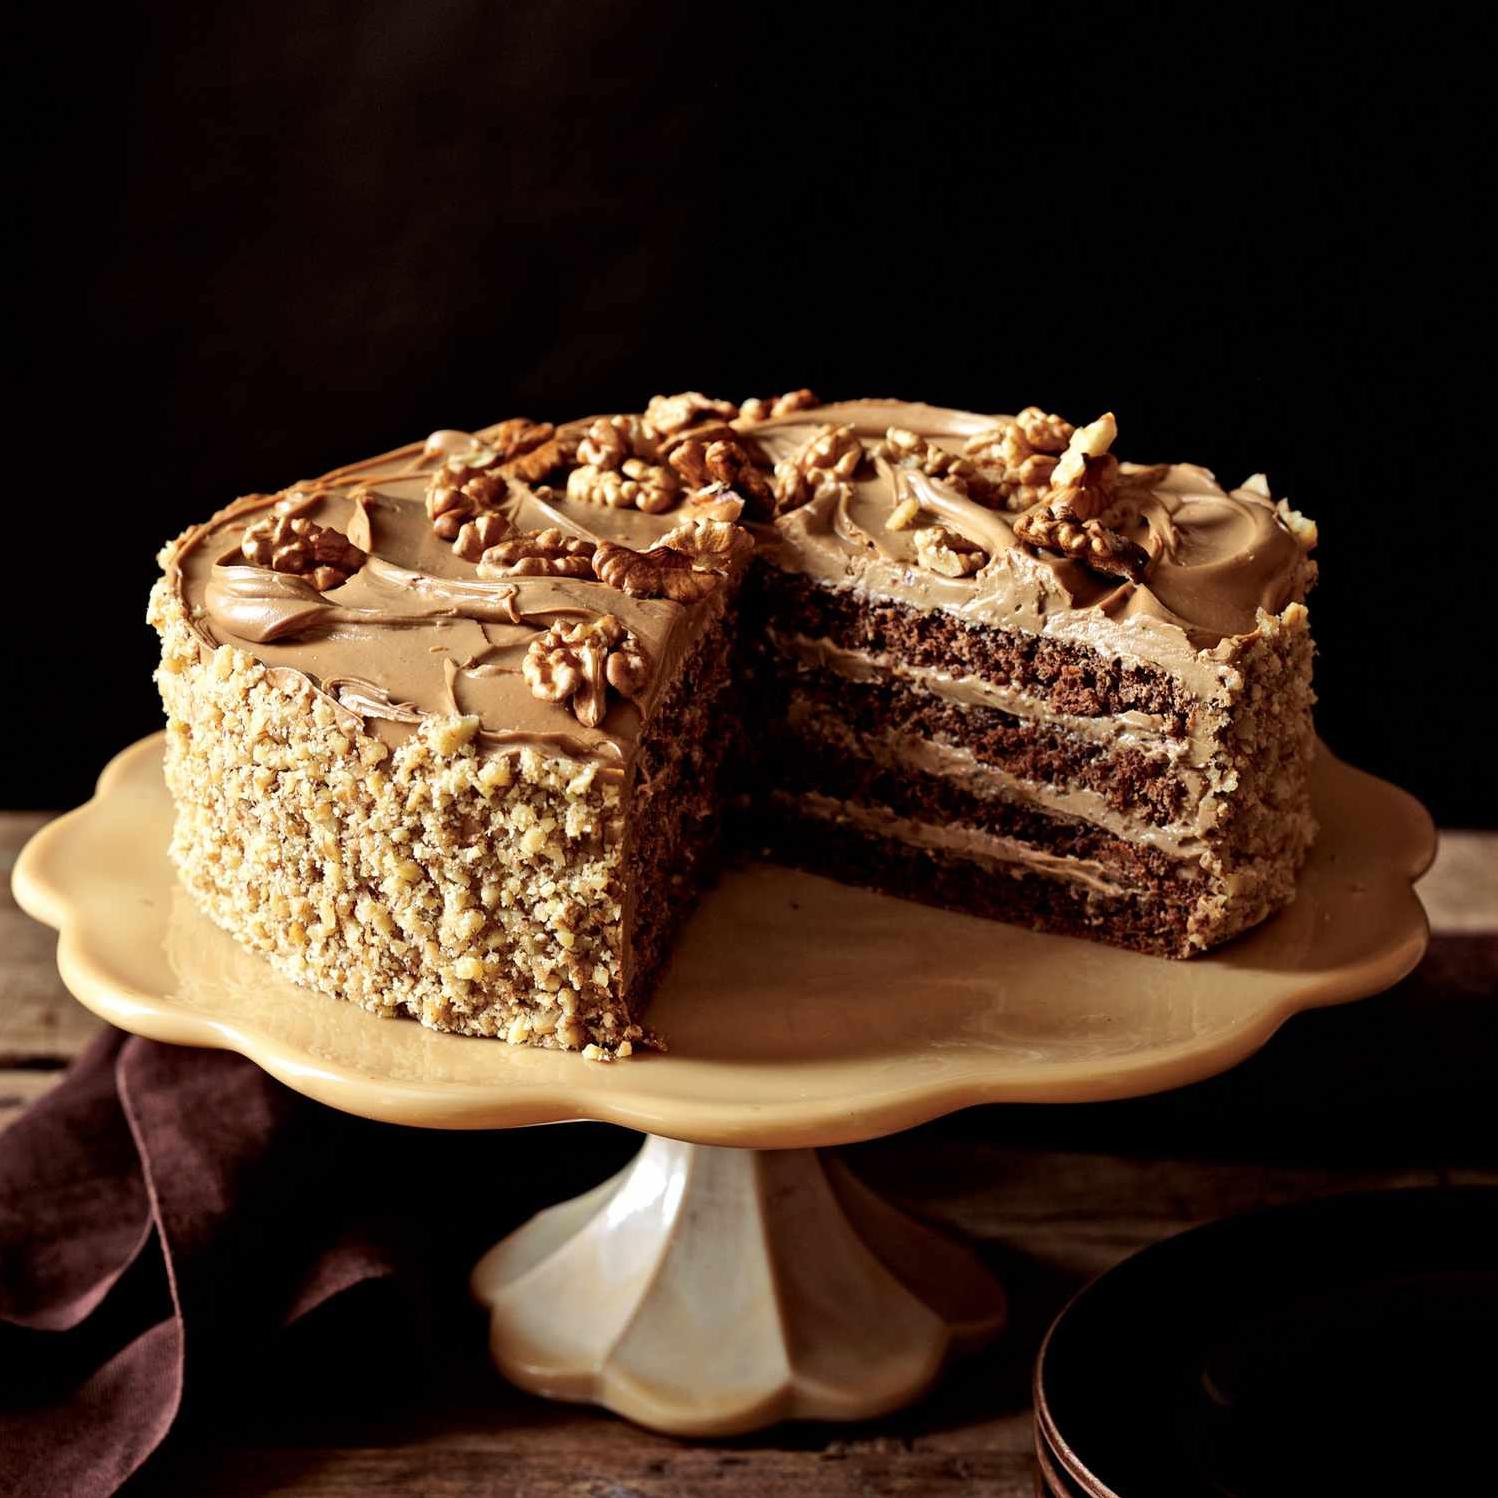  Decadent layers of chocolate and walnut in every bite!